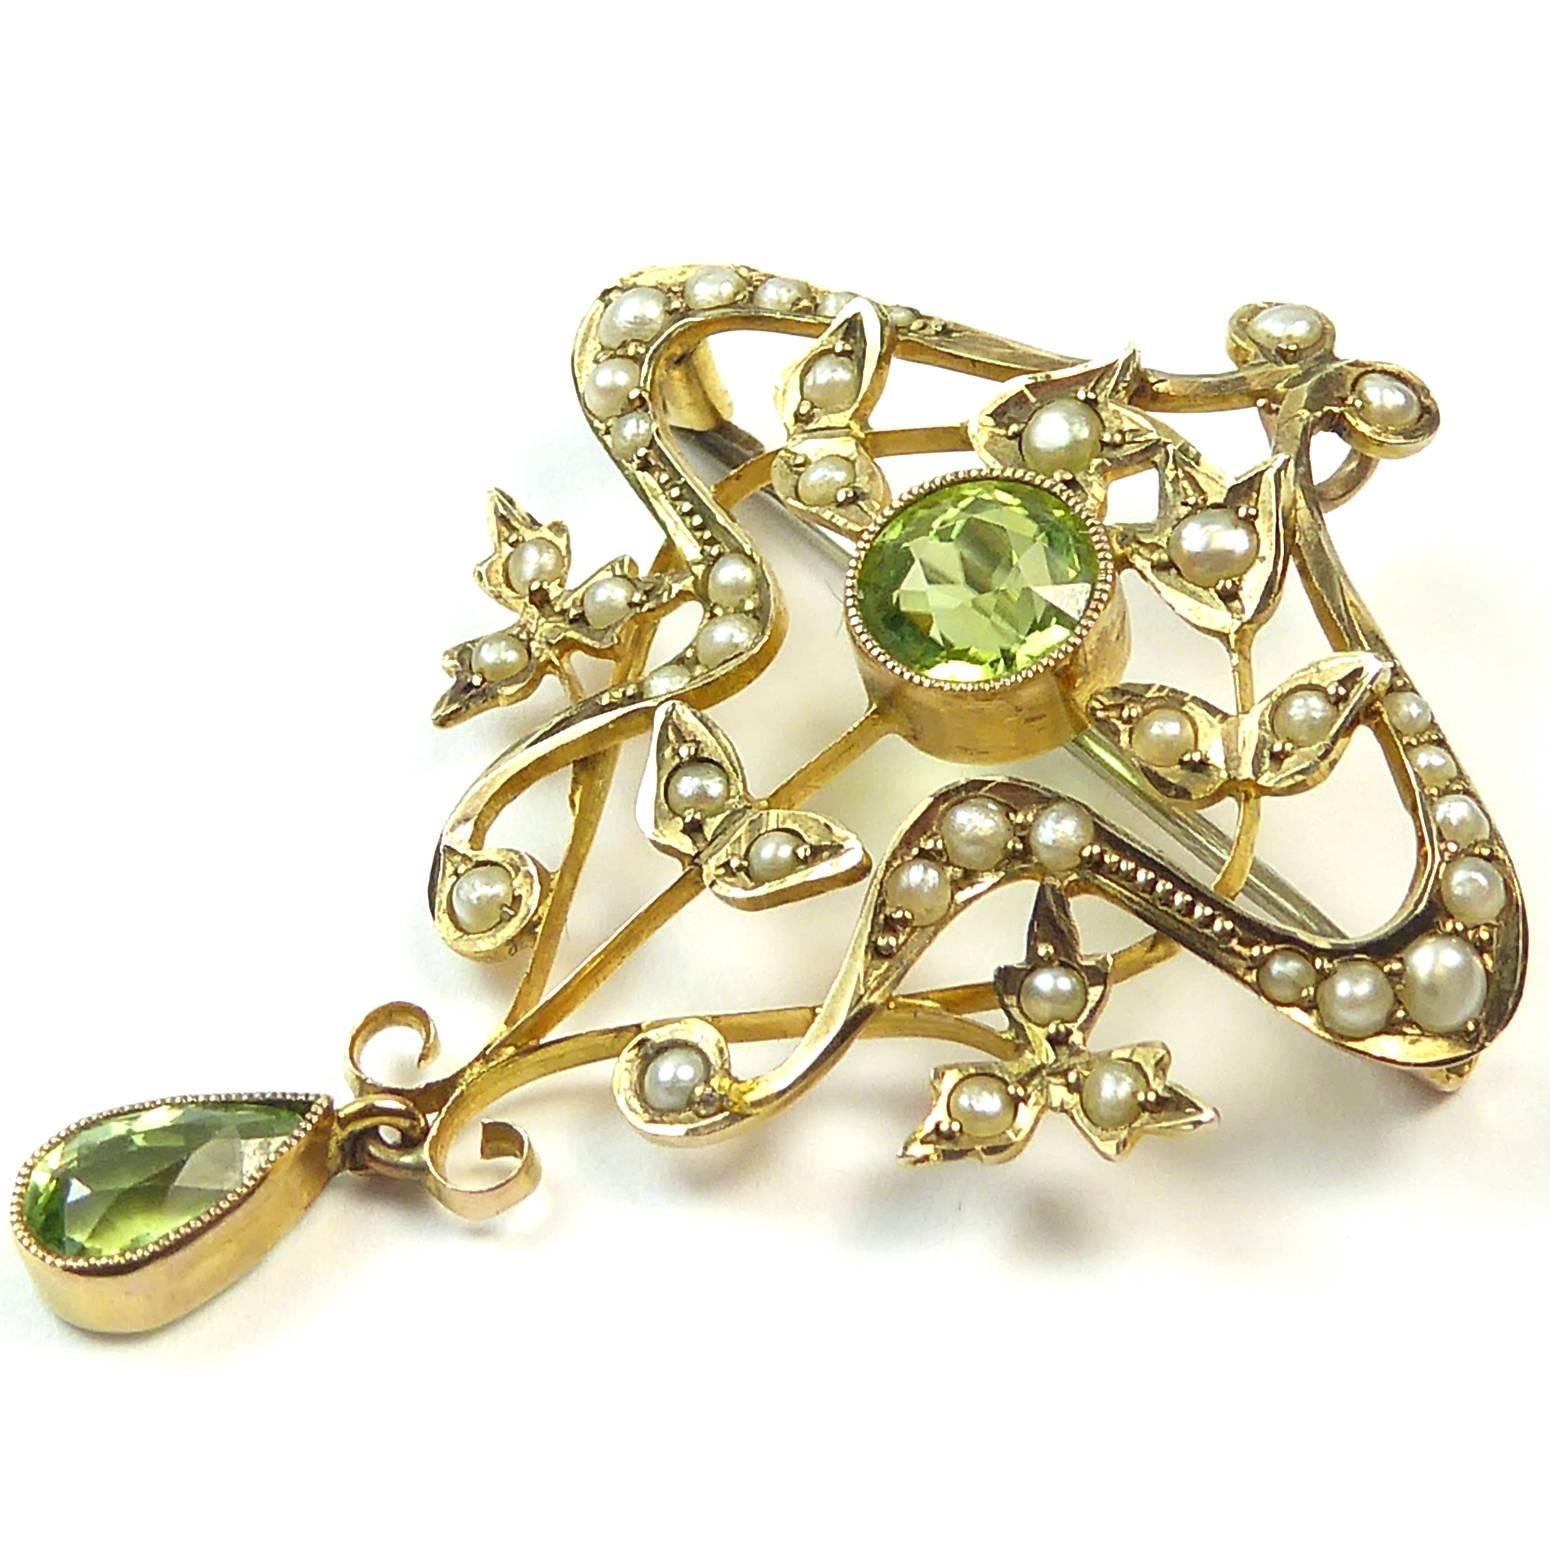 Women's Antique Art Nouveau Pendant Brooch with Peridots and Pearls, circa 1900